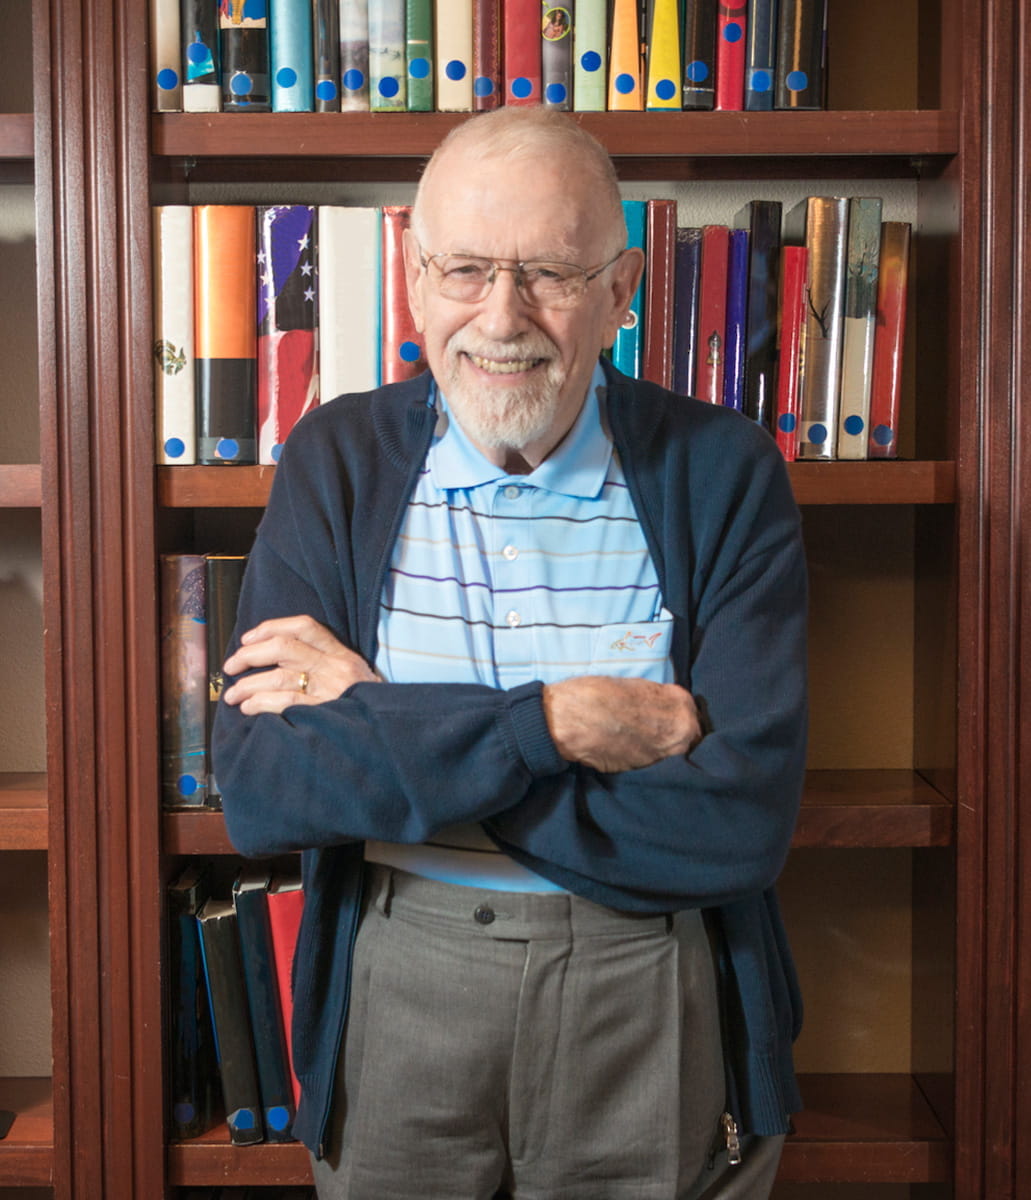 A man smiles while standing in front of a bookshelf.